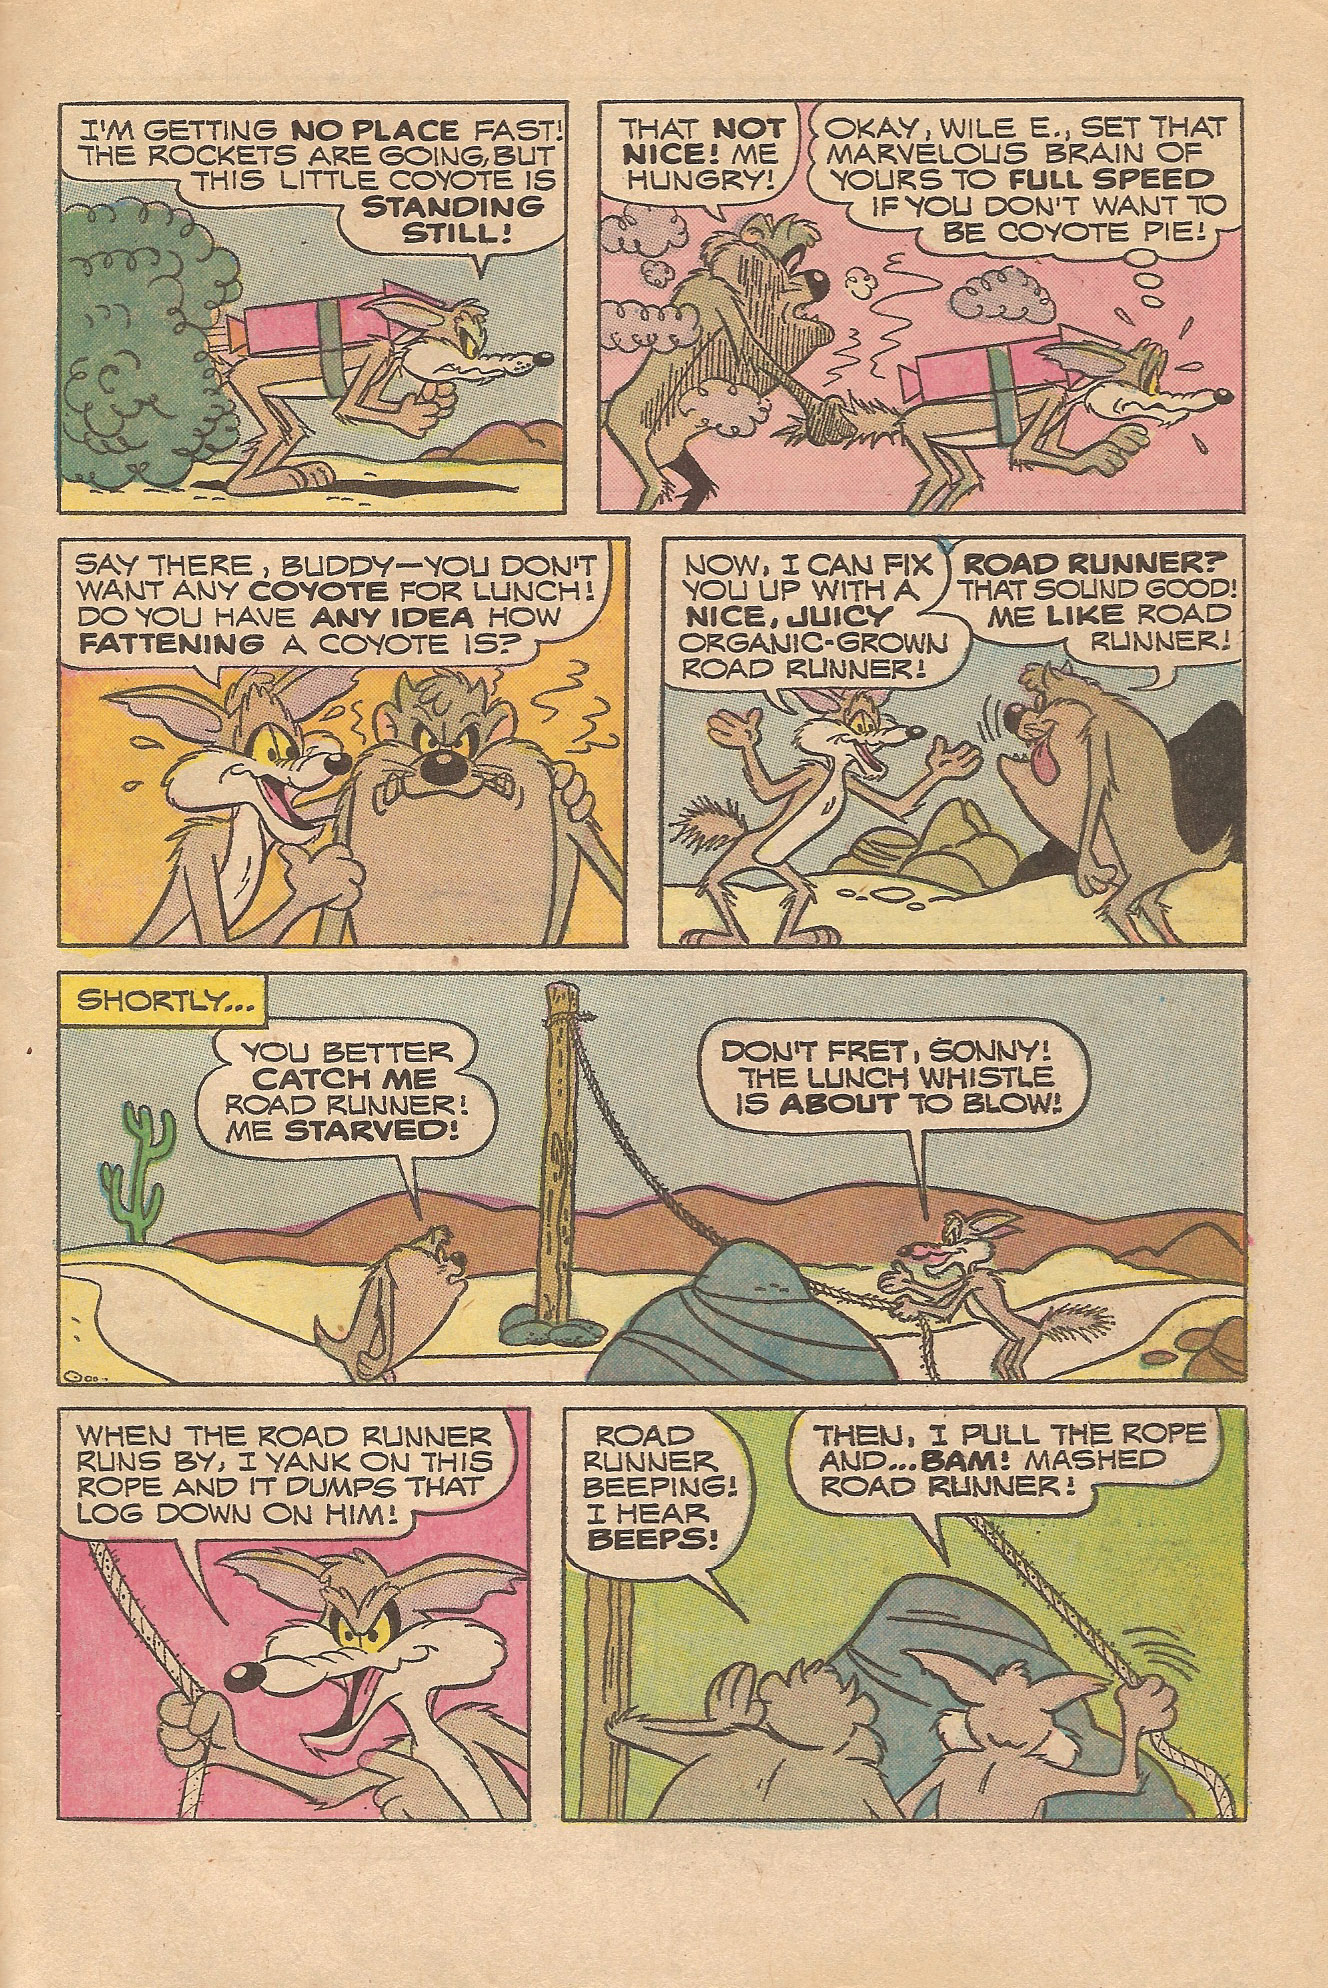 Read online Beep Beep The Road Runner comic -  Issue #37 - 31